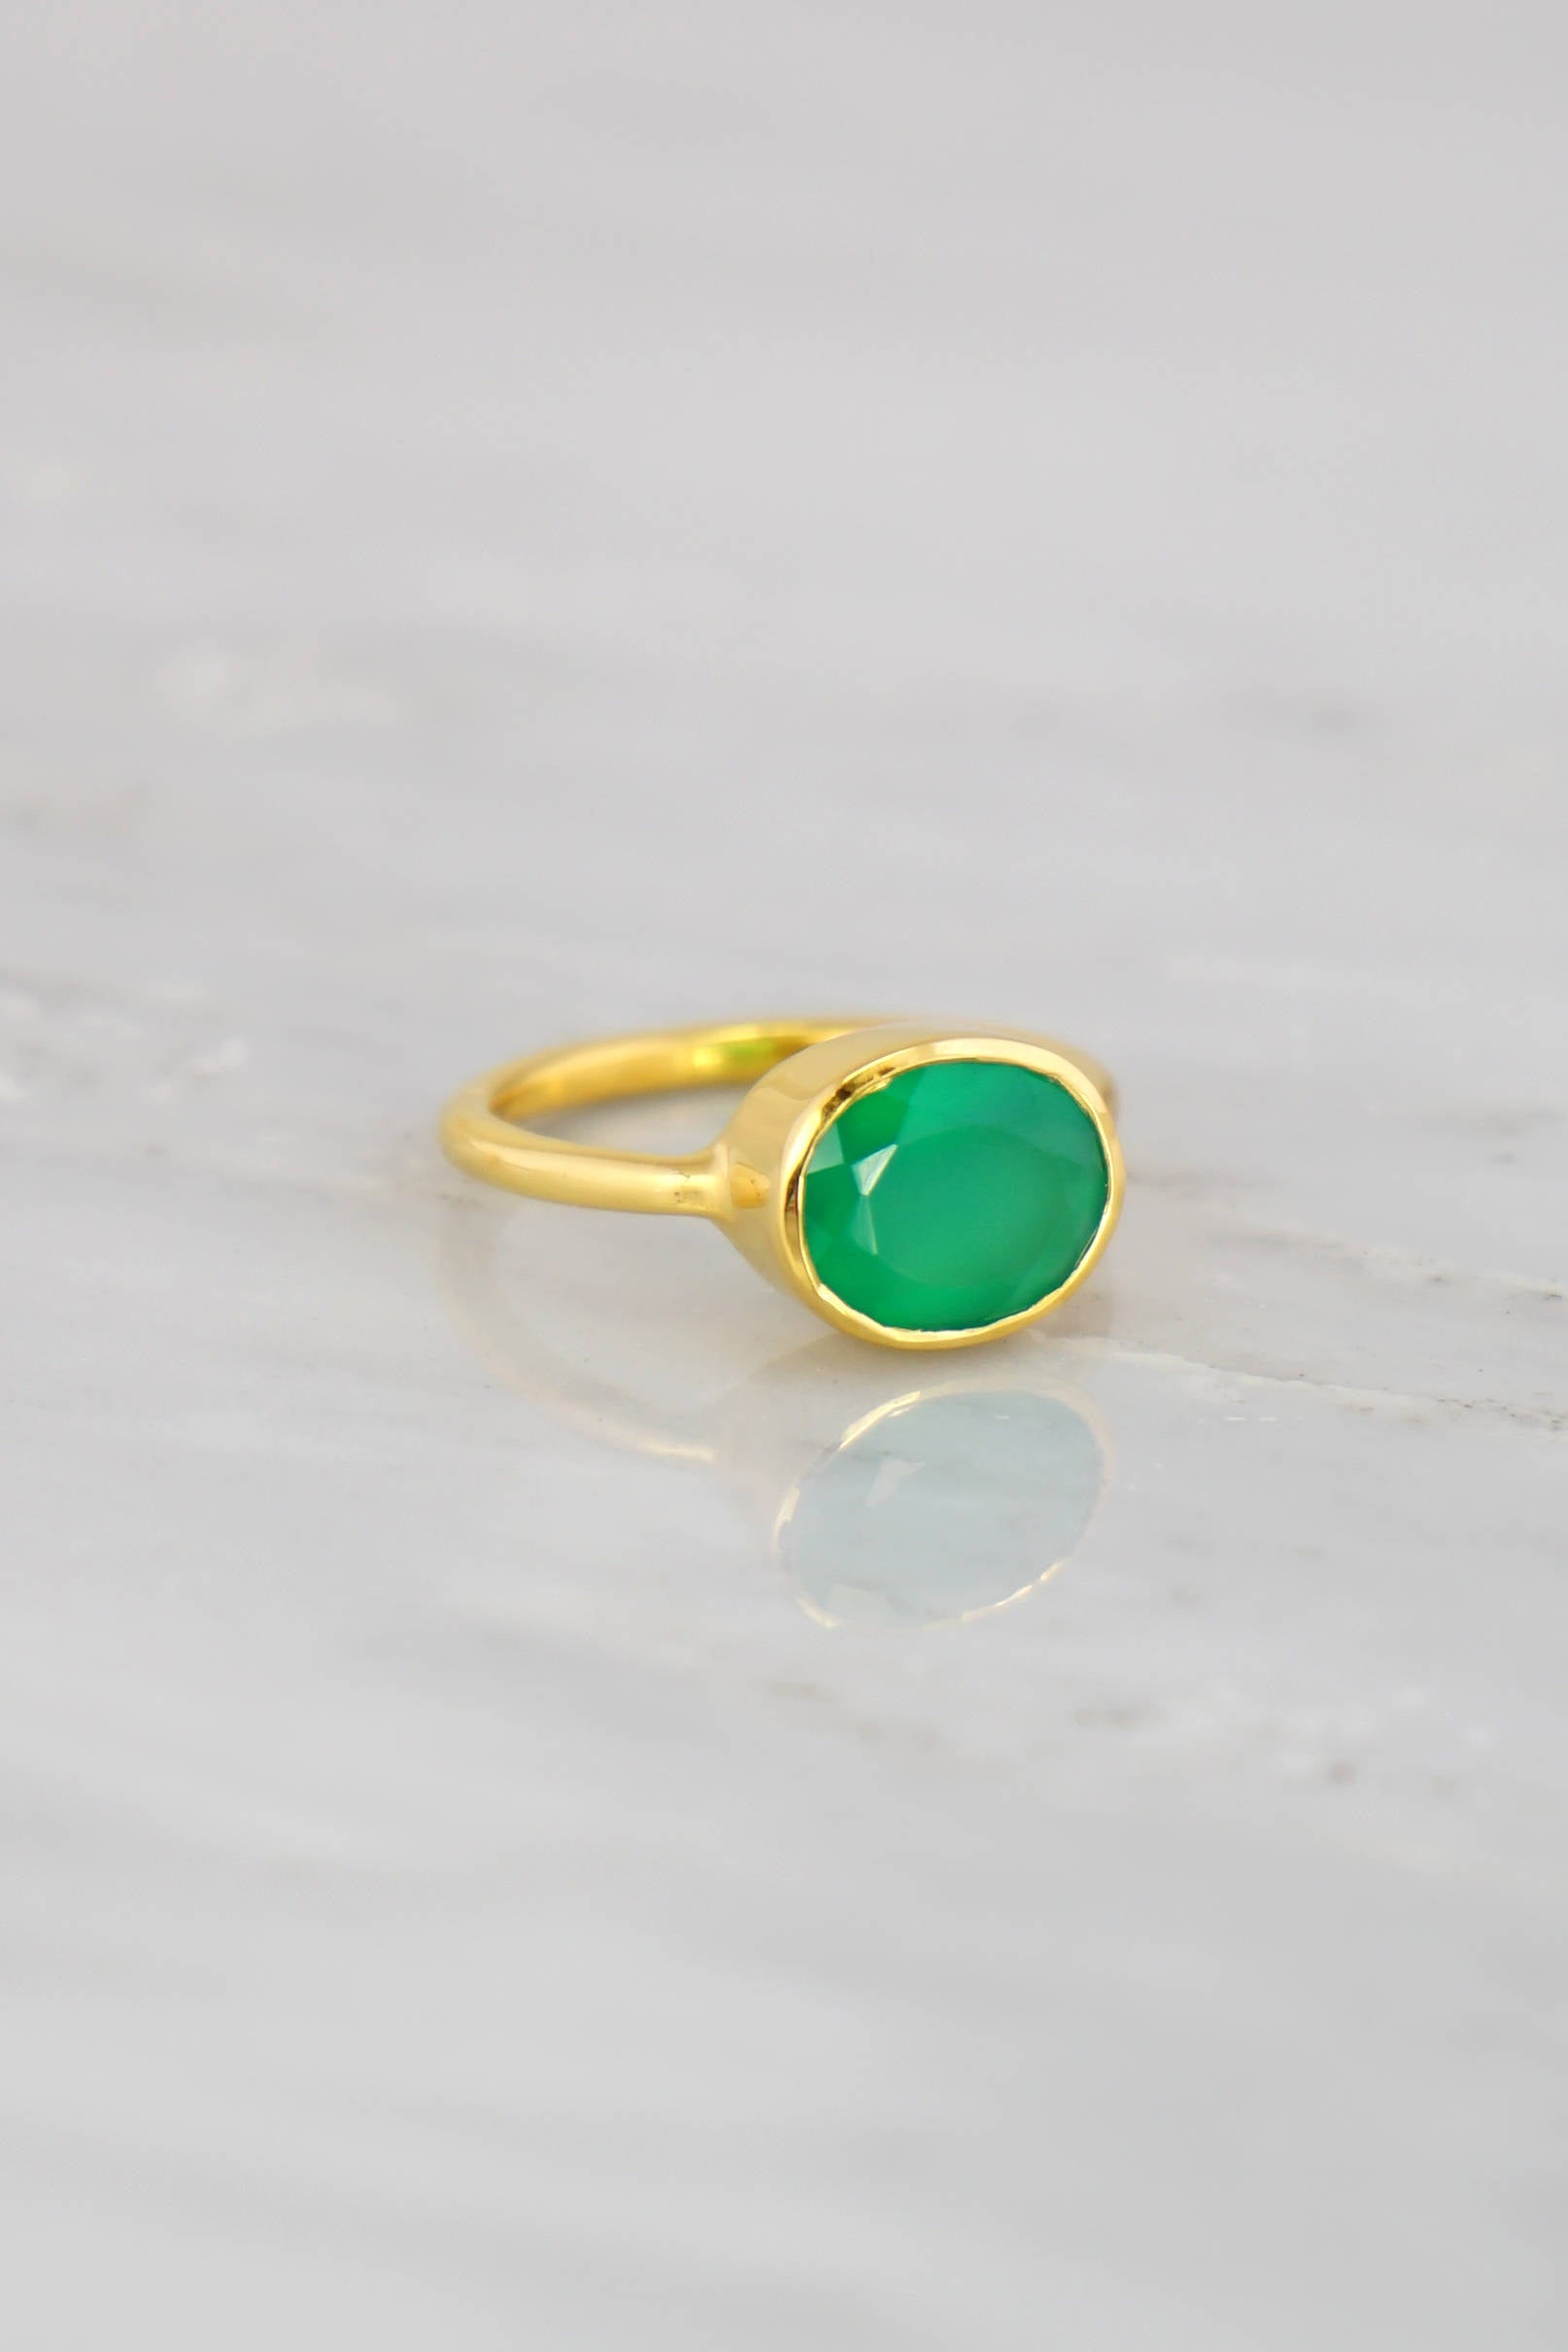 Pear Emerald Ring Green Color Ring Pear Stackable Ring Matching Rings Set  Baguette Ring Wedding Ring Set Bridesmaid Gift Rubysta - Etsy